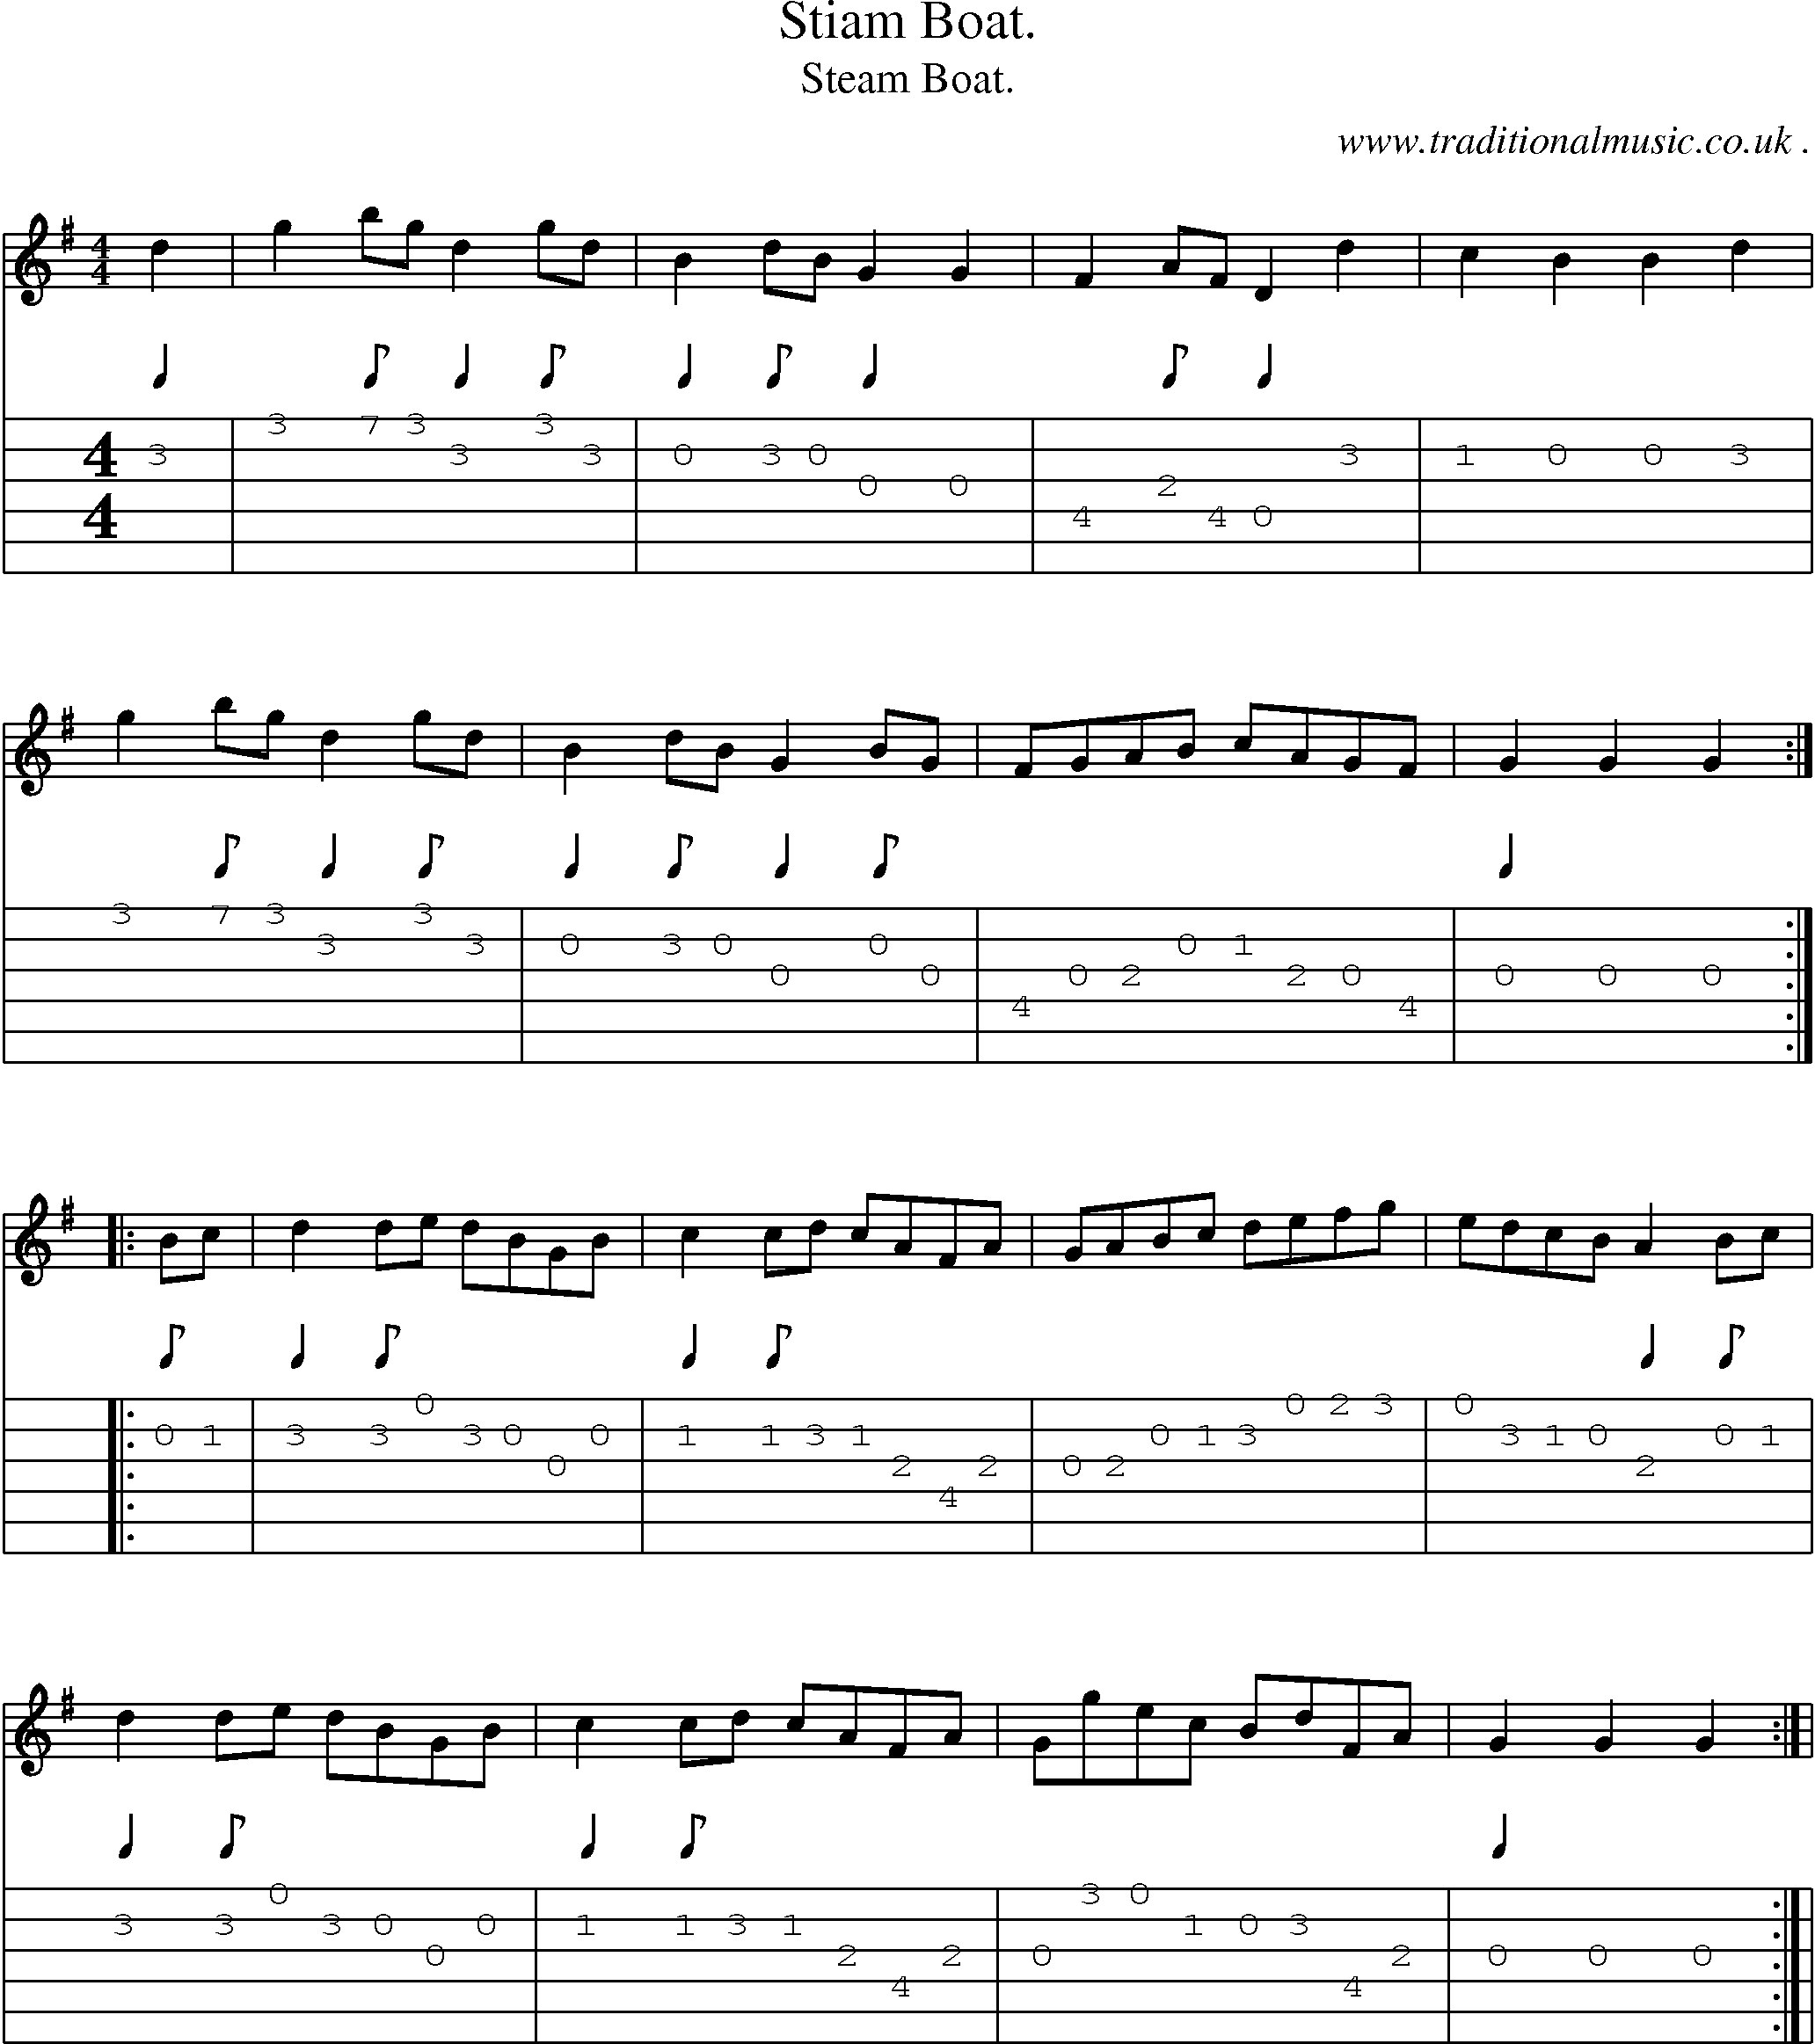 Sheet-Music and Guitar Tabs for Stiam Boat